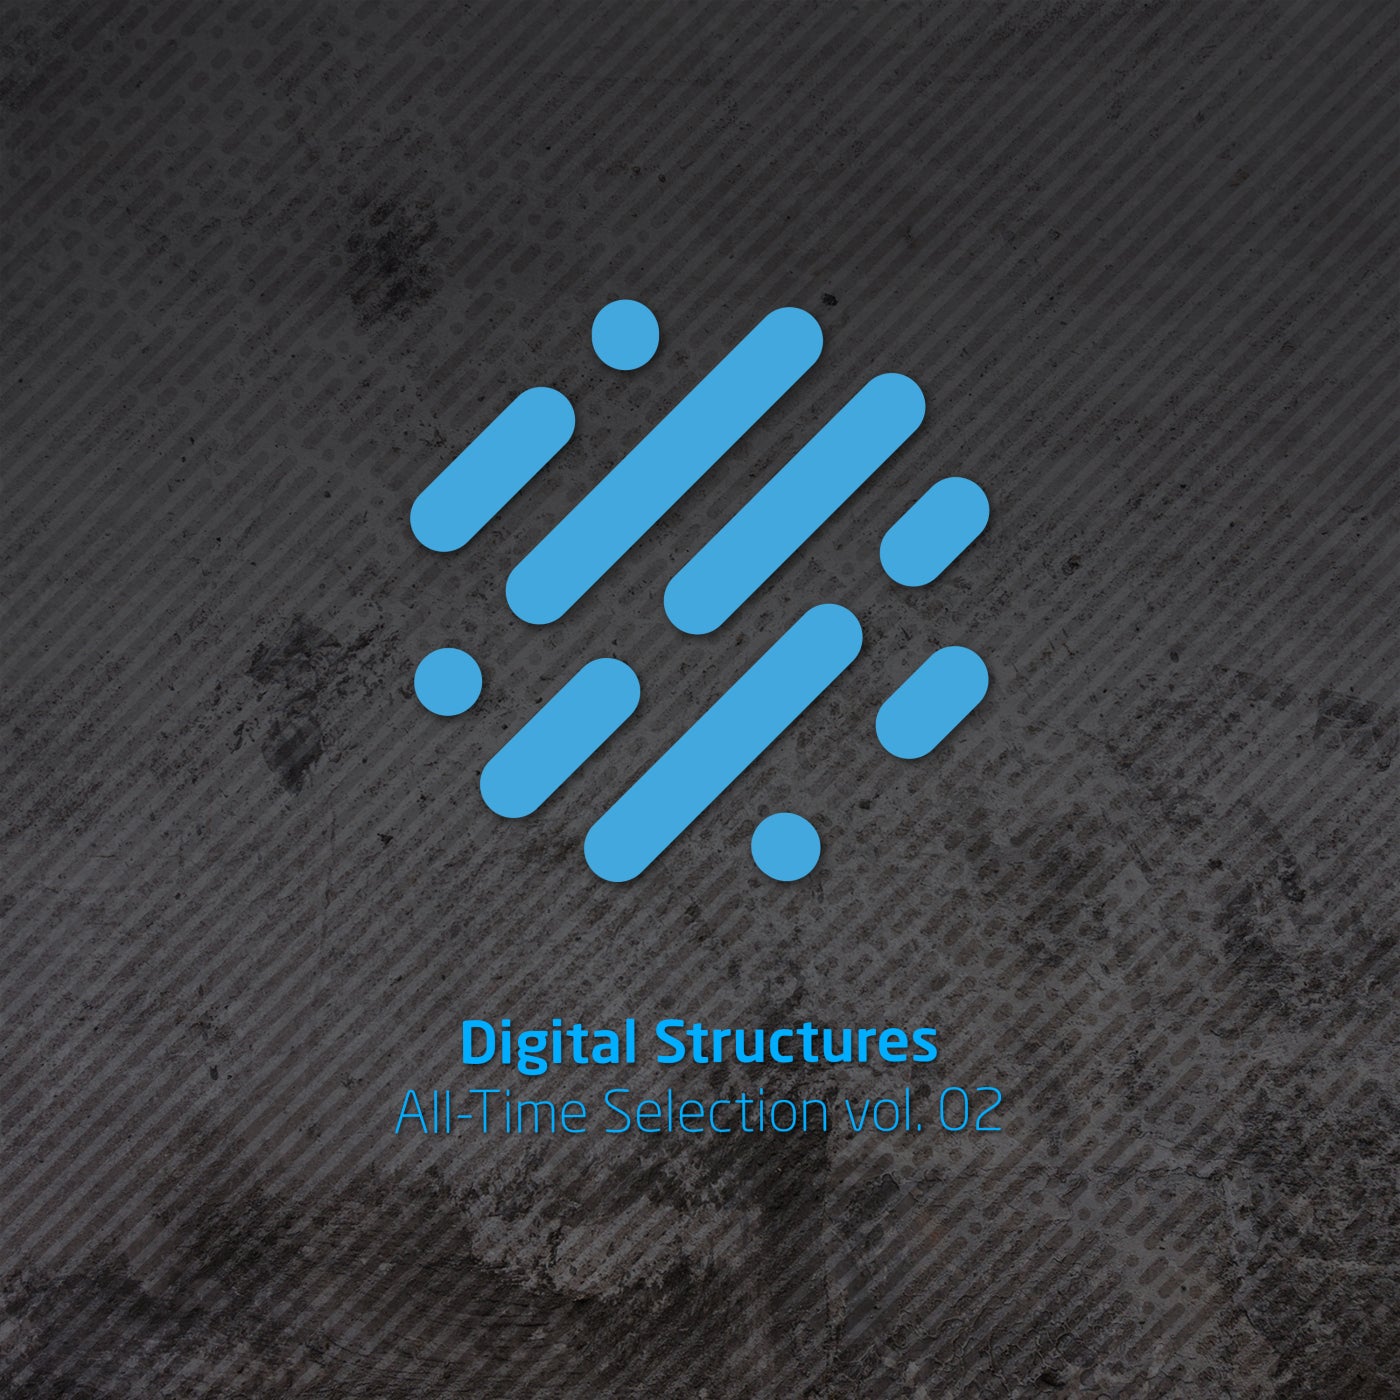 Digital Structures All-Time Selection, Vol. 02